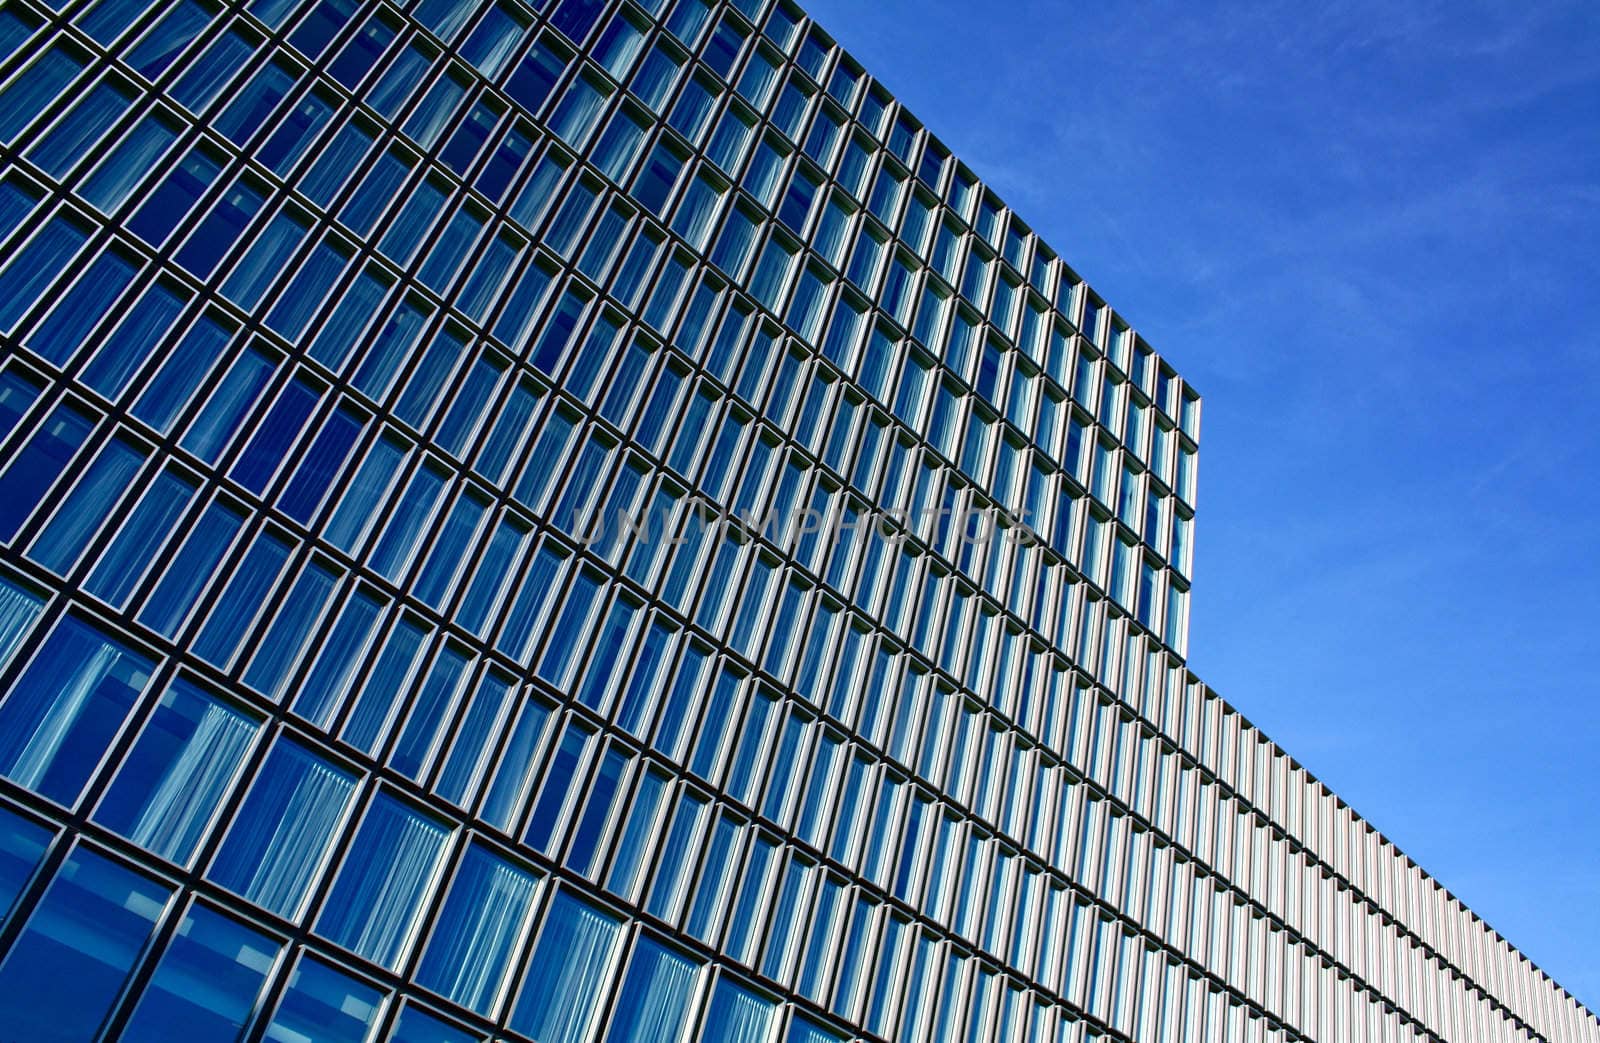 Modern architecture formed in a building reflecting blue sky